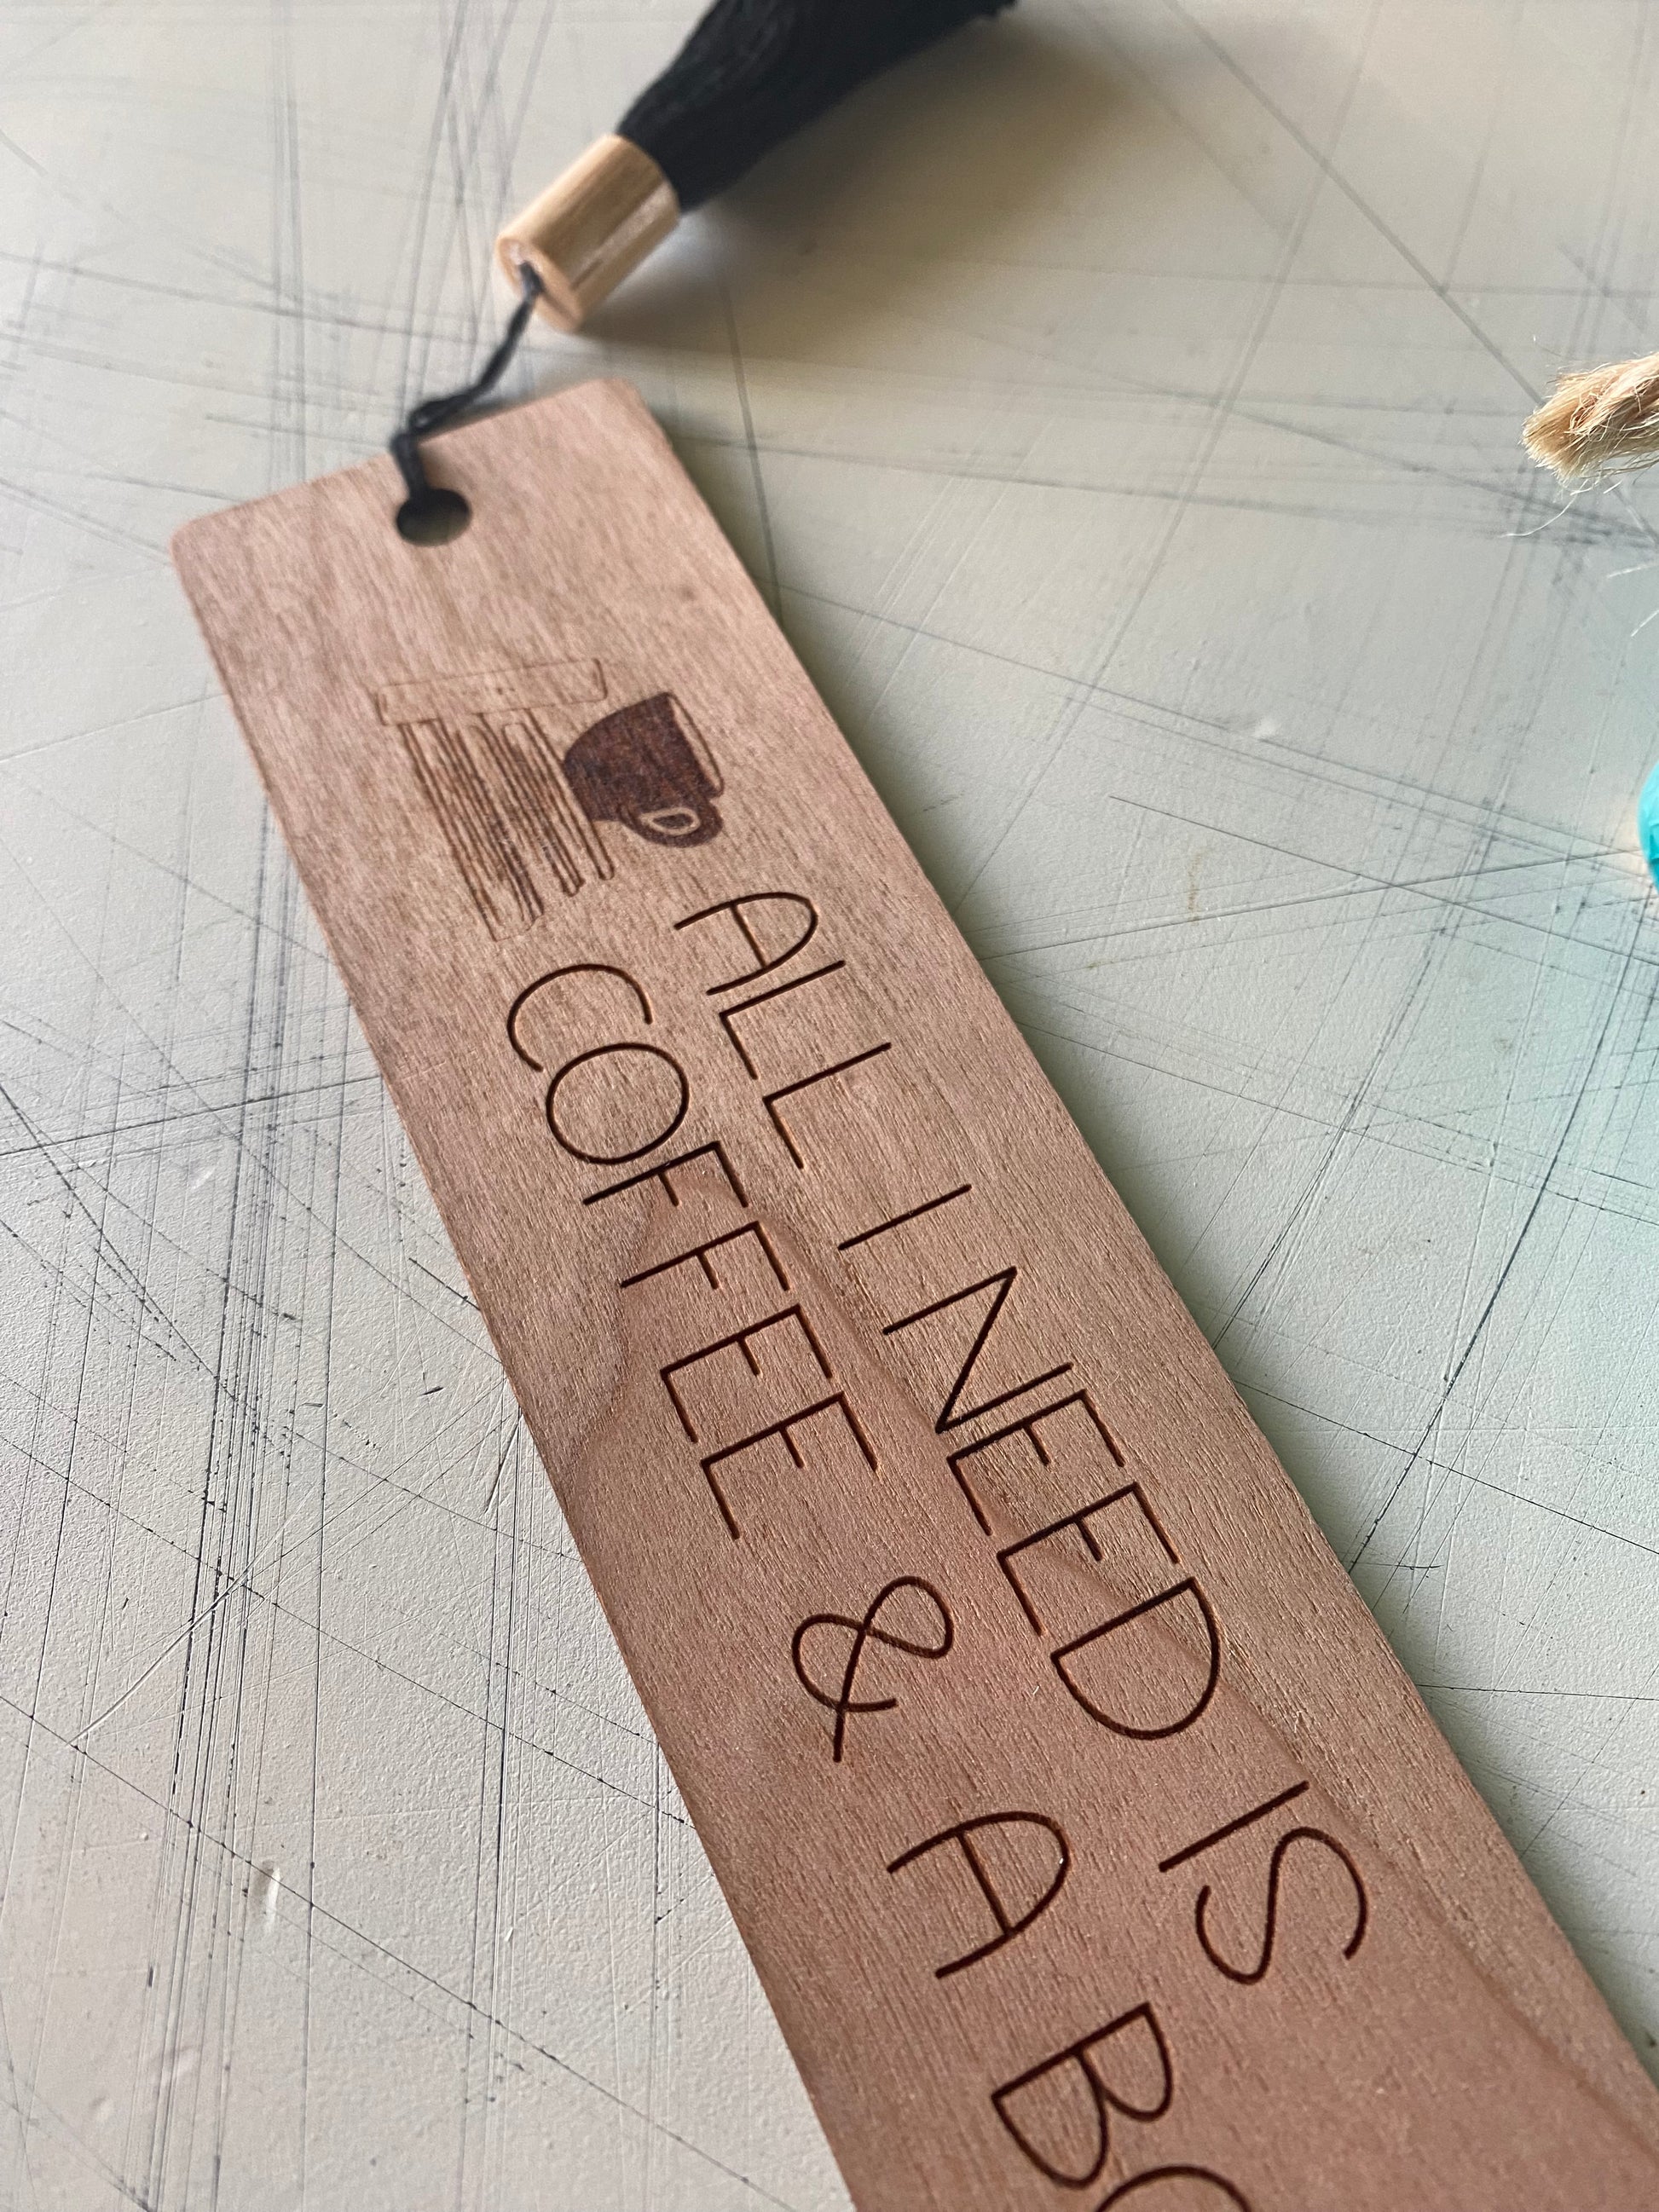 All I need is coffee & a book - wood bookmark - Novotny Designs